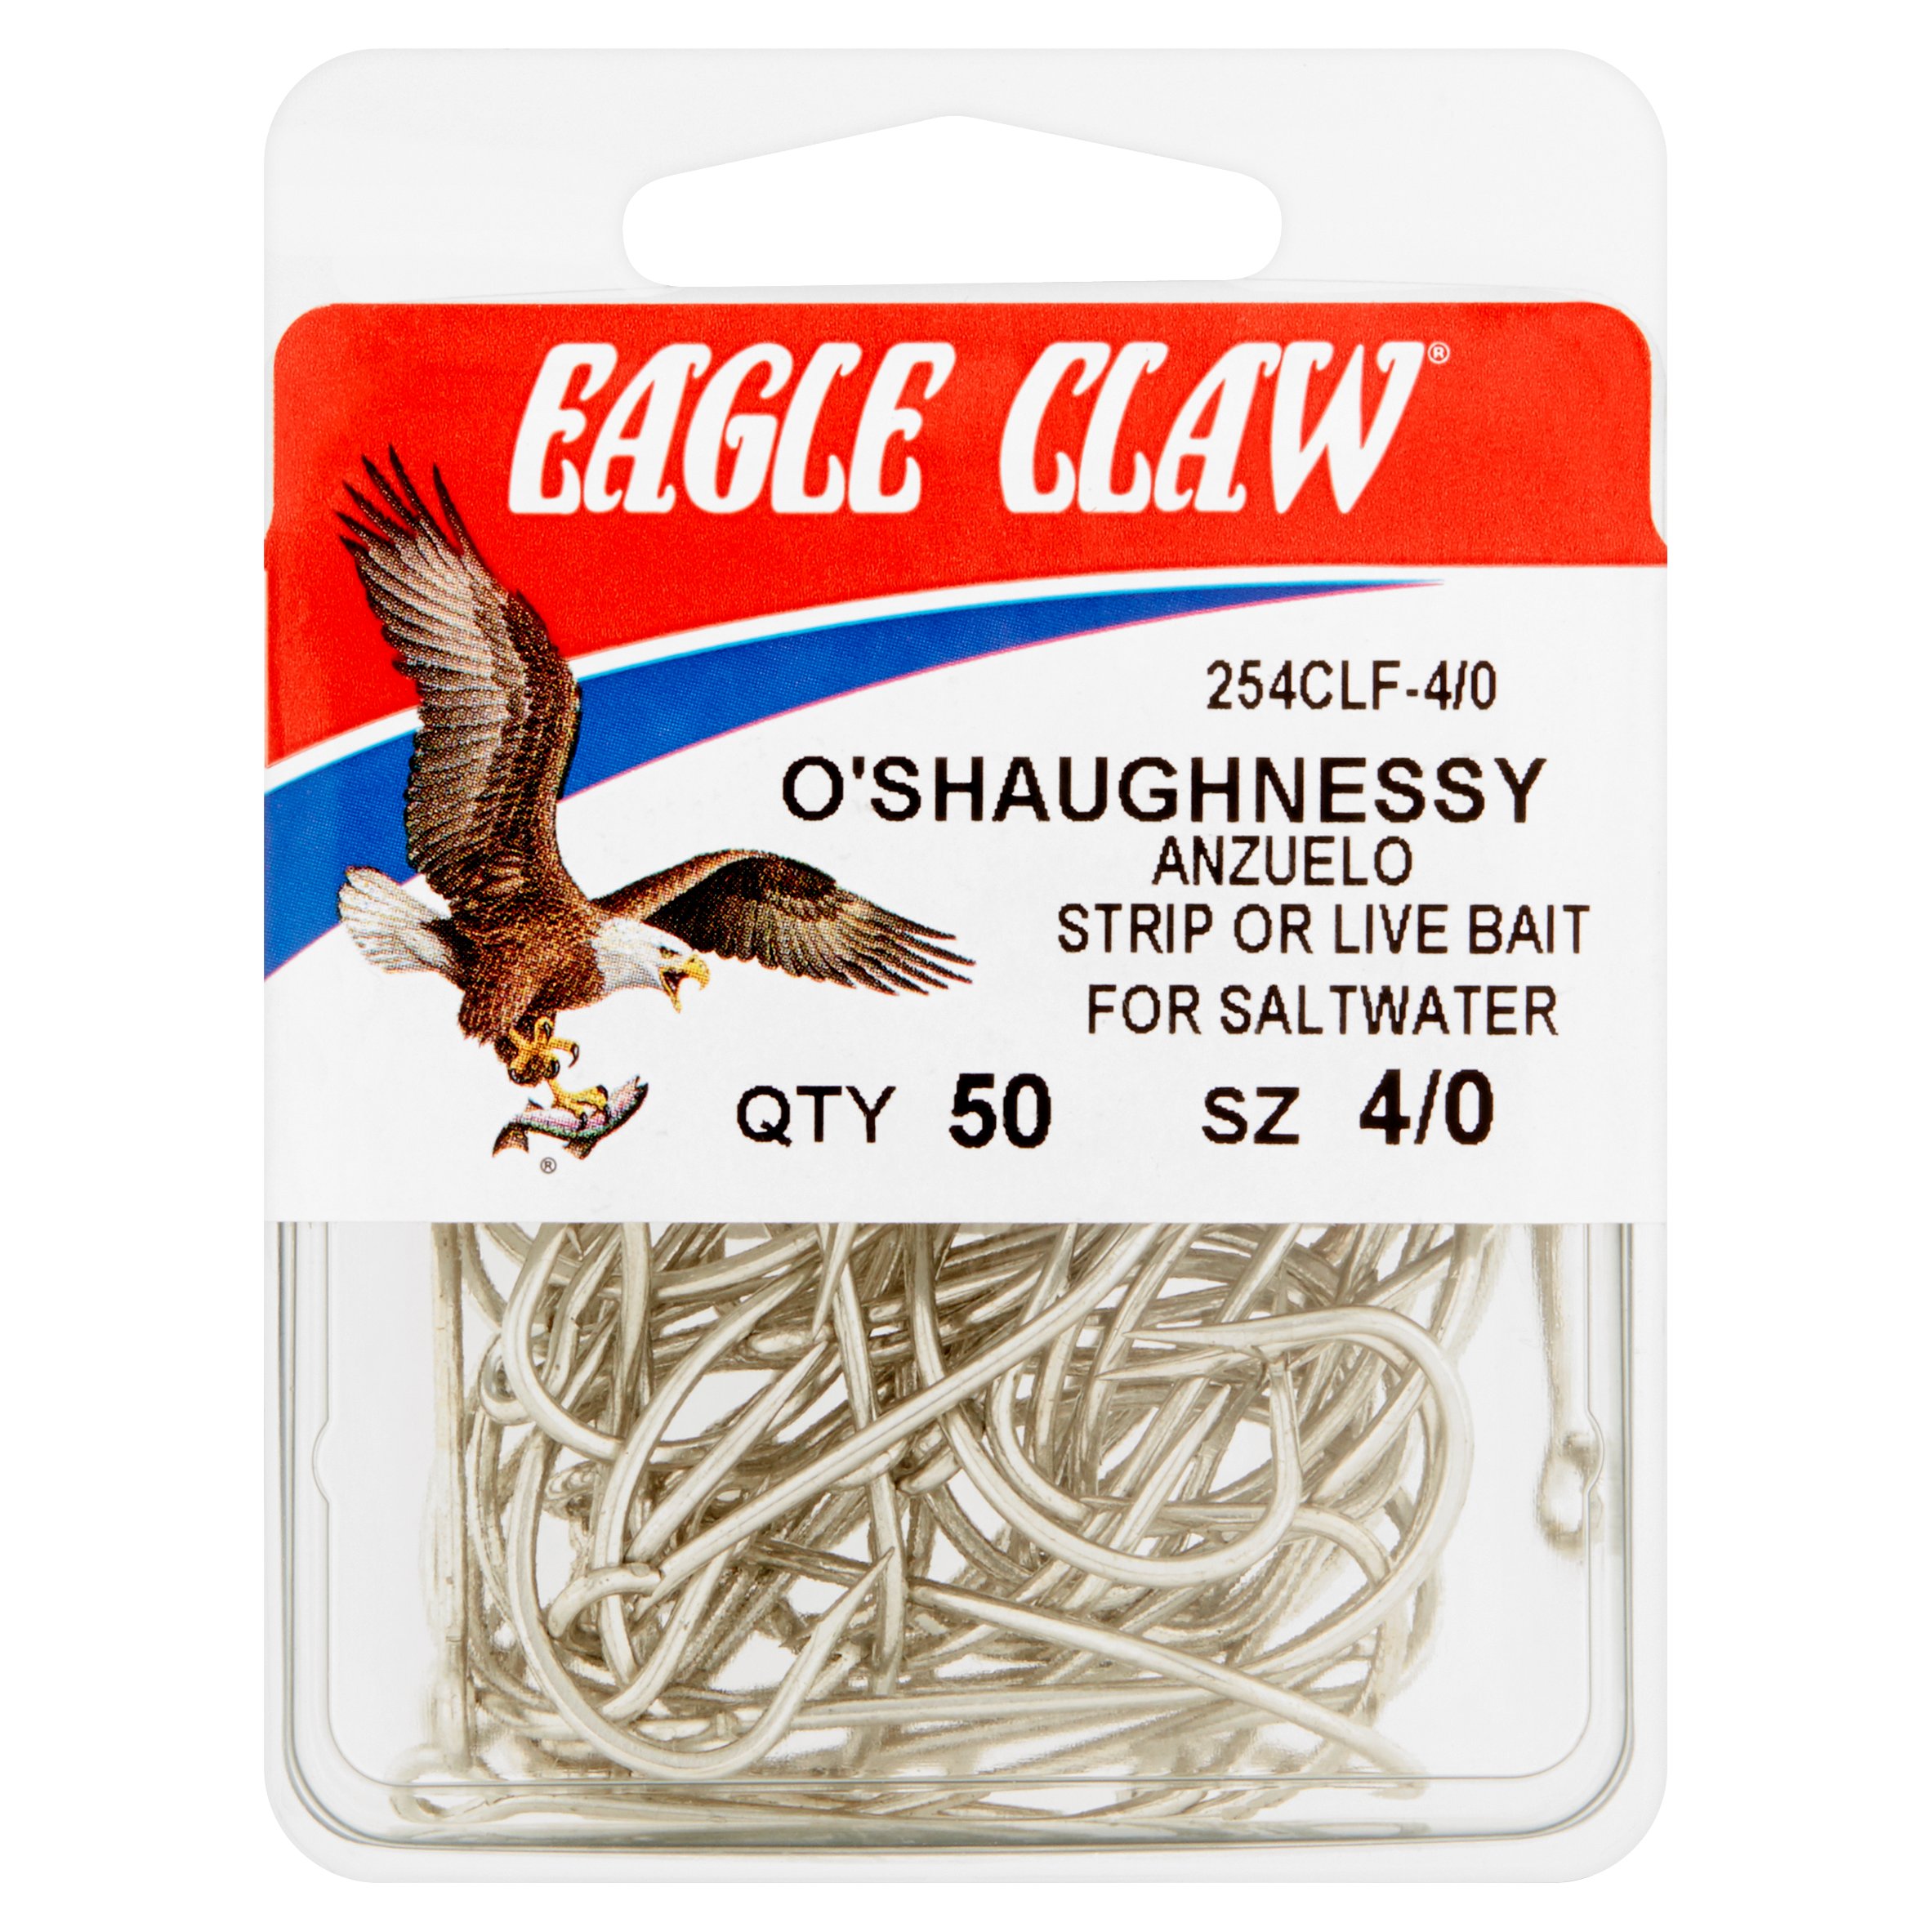 Eagle Claw 254CLF3-4/0 O'Shaughnessy Fish Hook, Size 4, 50 Pack - image 1 of 2